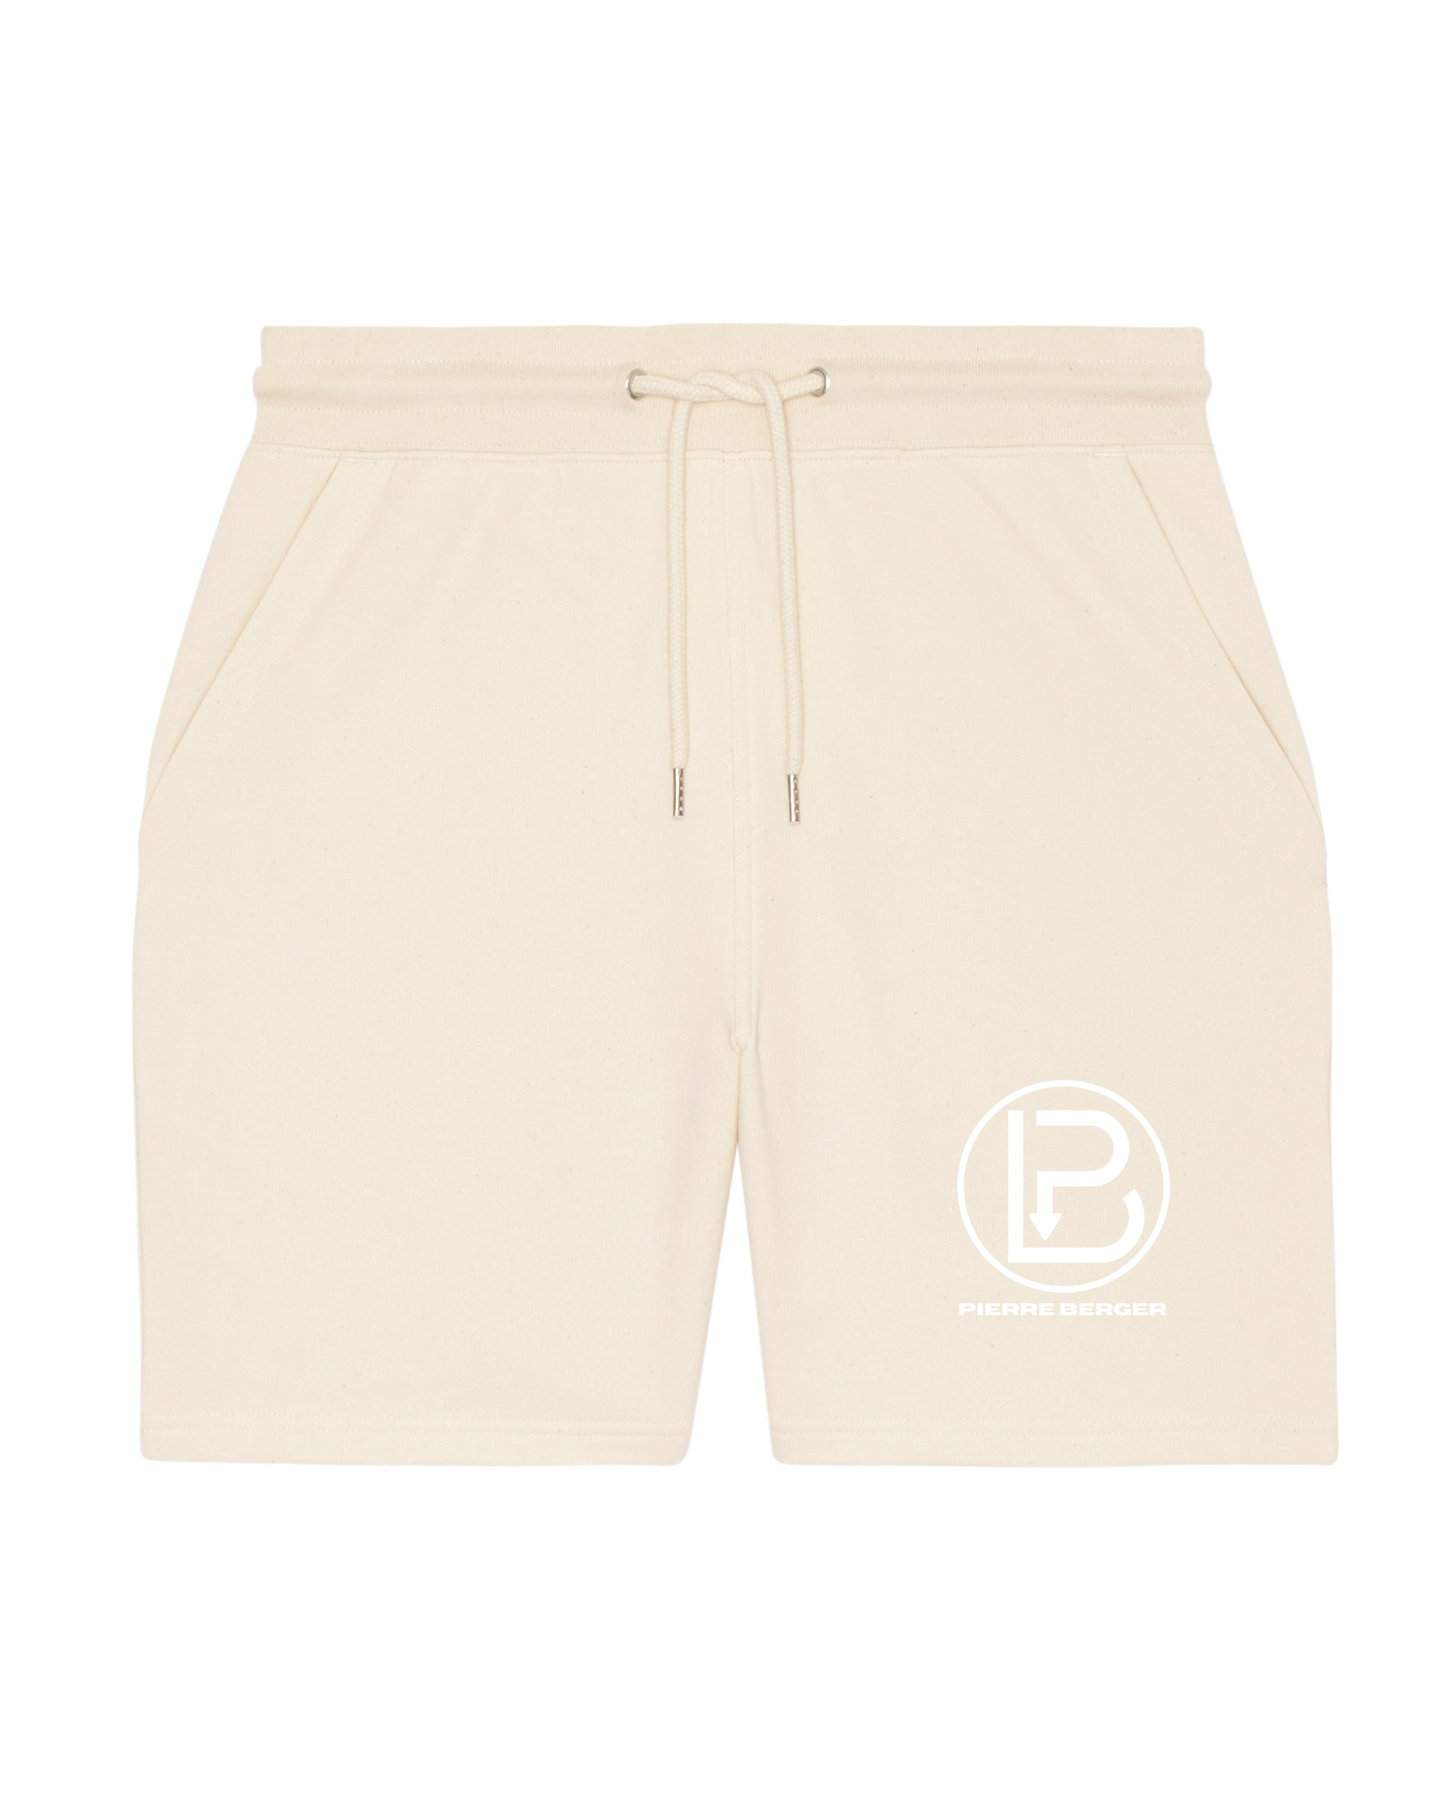 PIERRE BERGER - Unisex jogging shorts 100% recycled embroidery